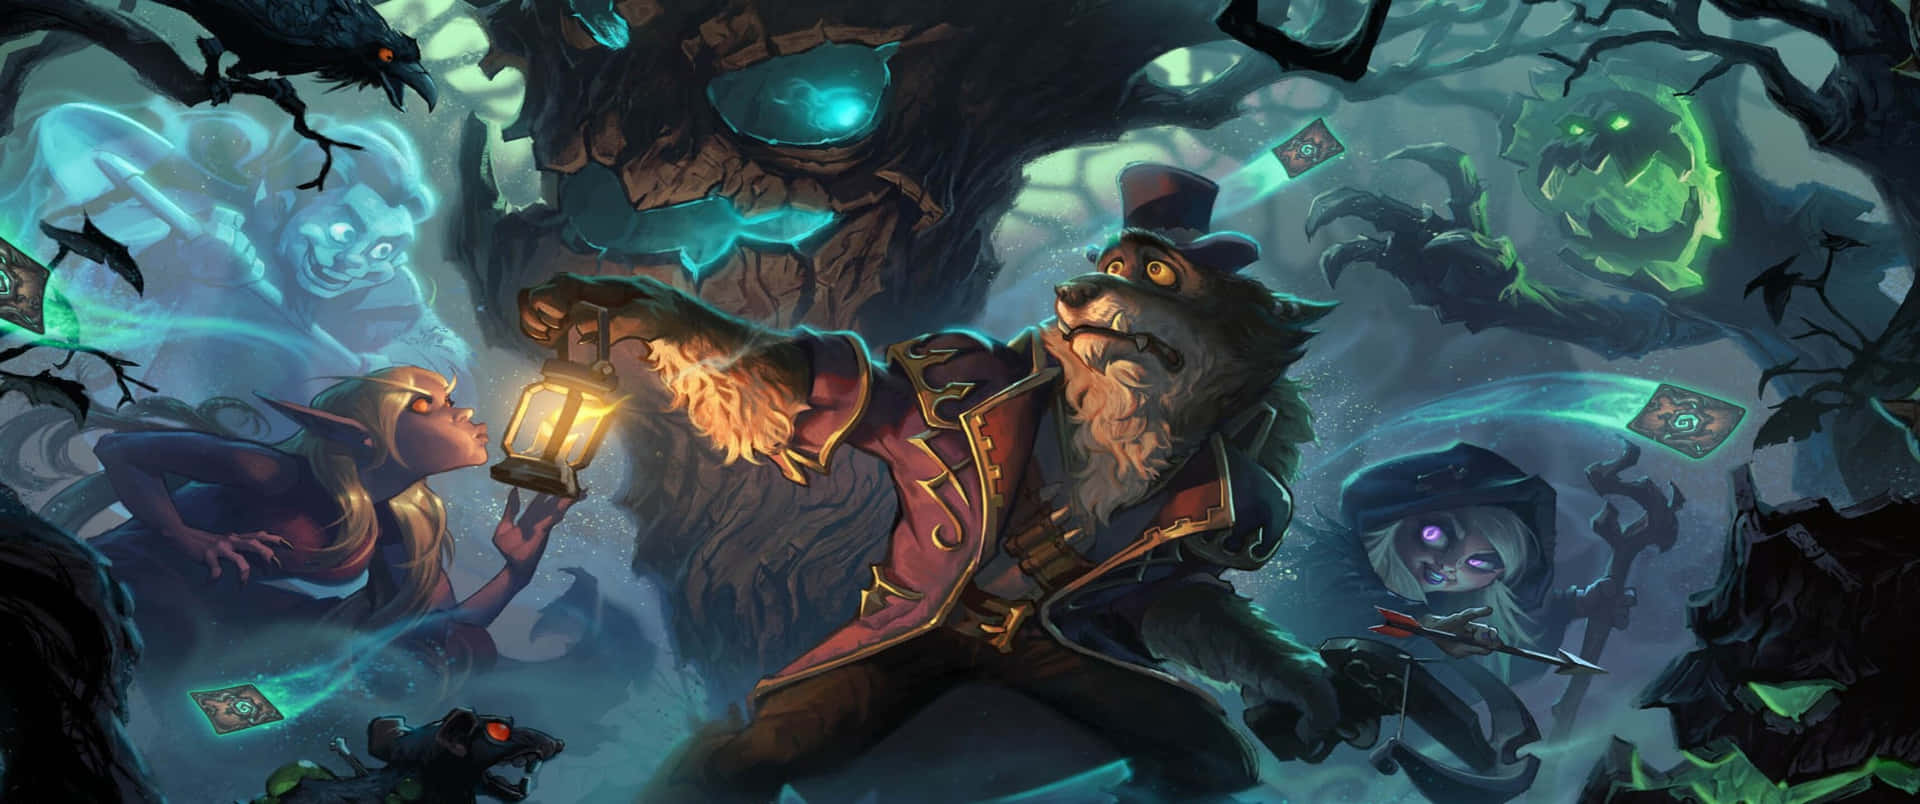 Dive into the world of Hearthstone with this high-resolution 3440x1440p background.